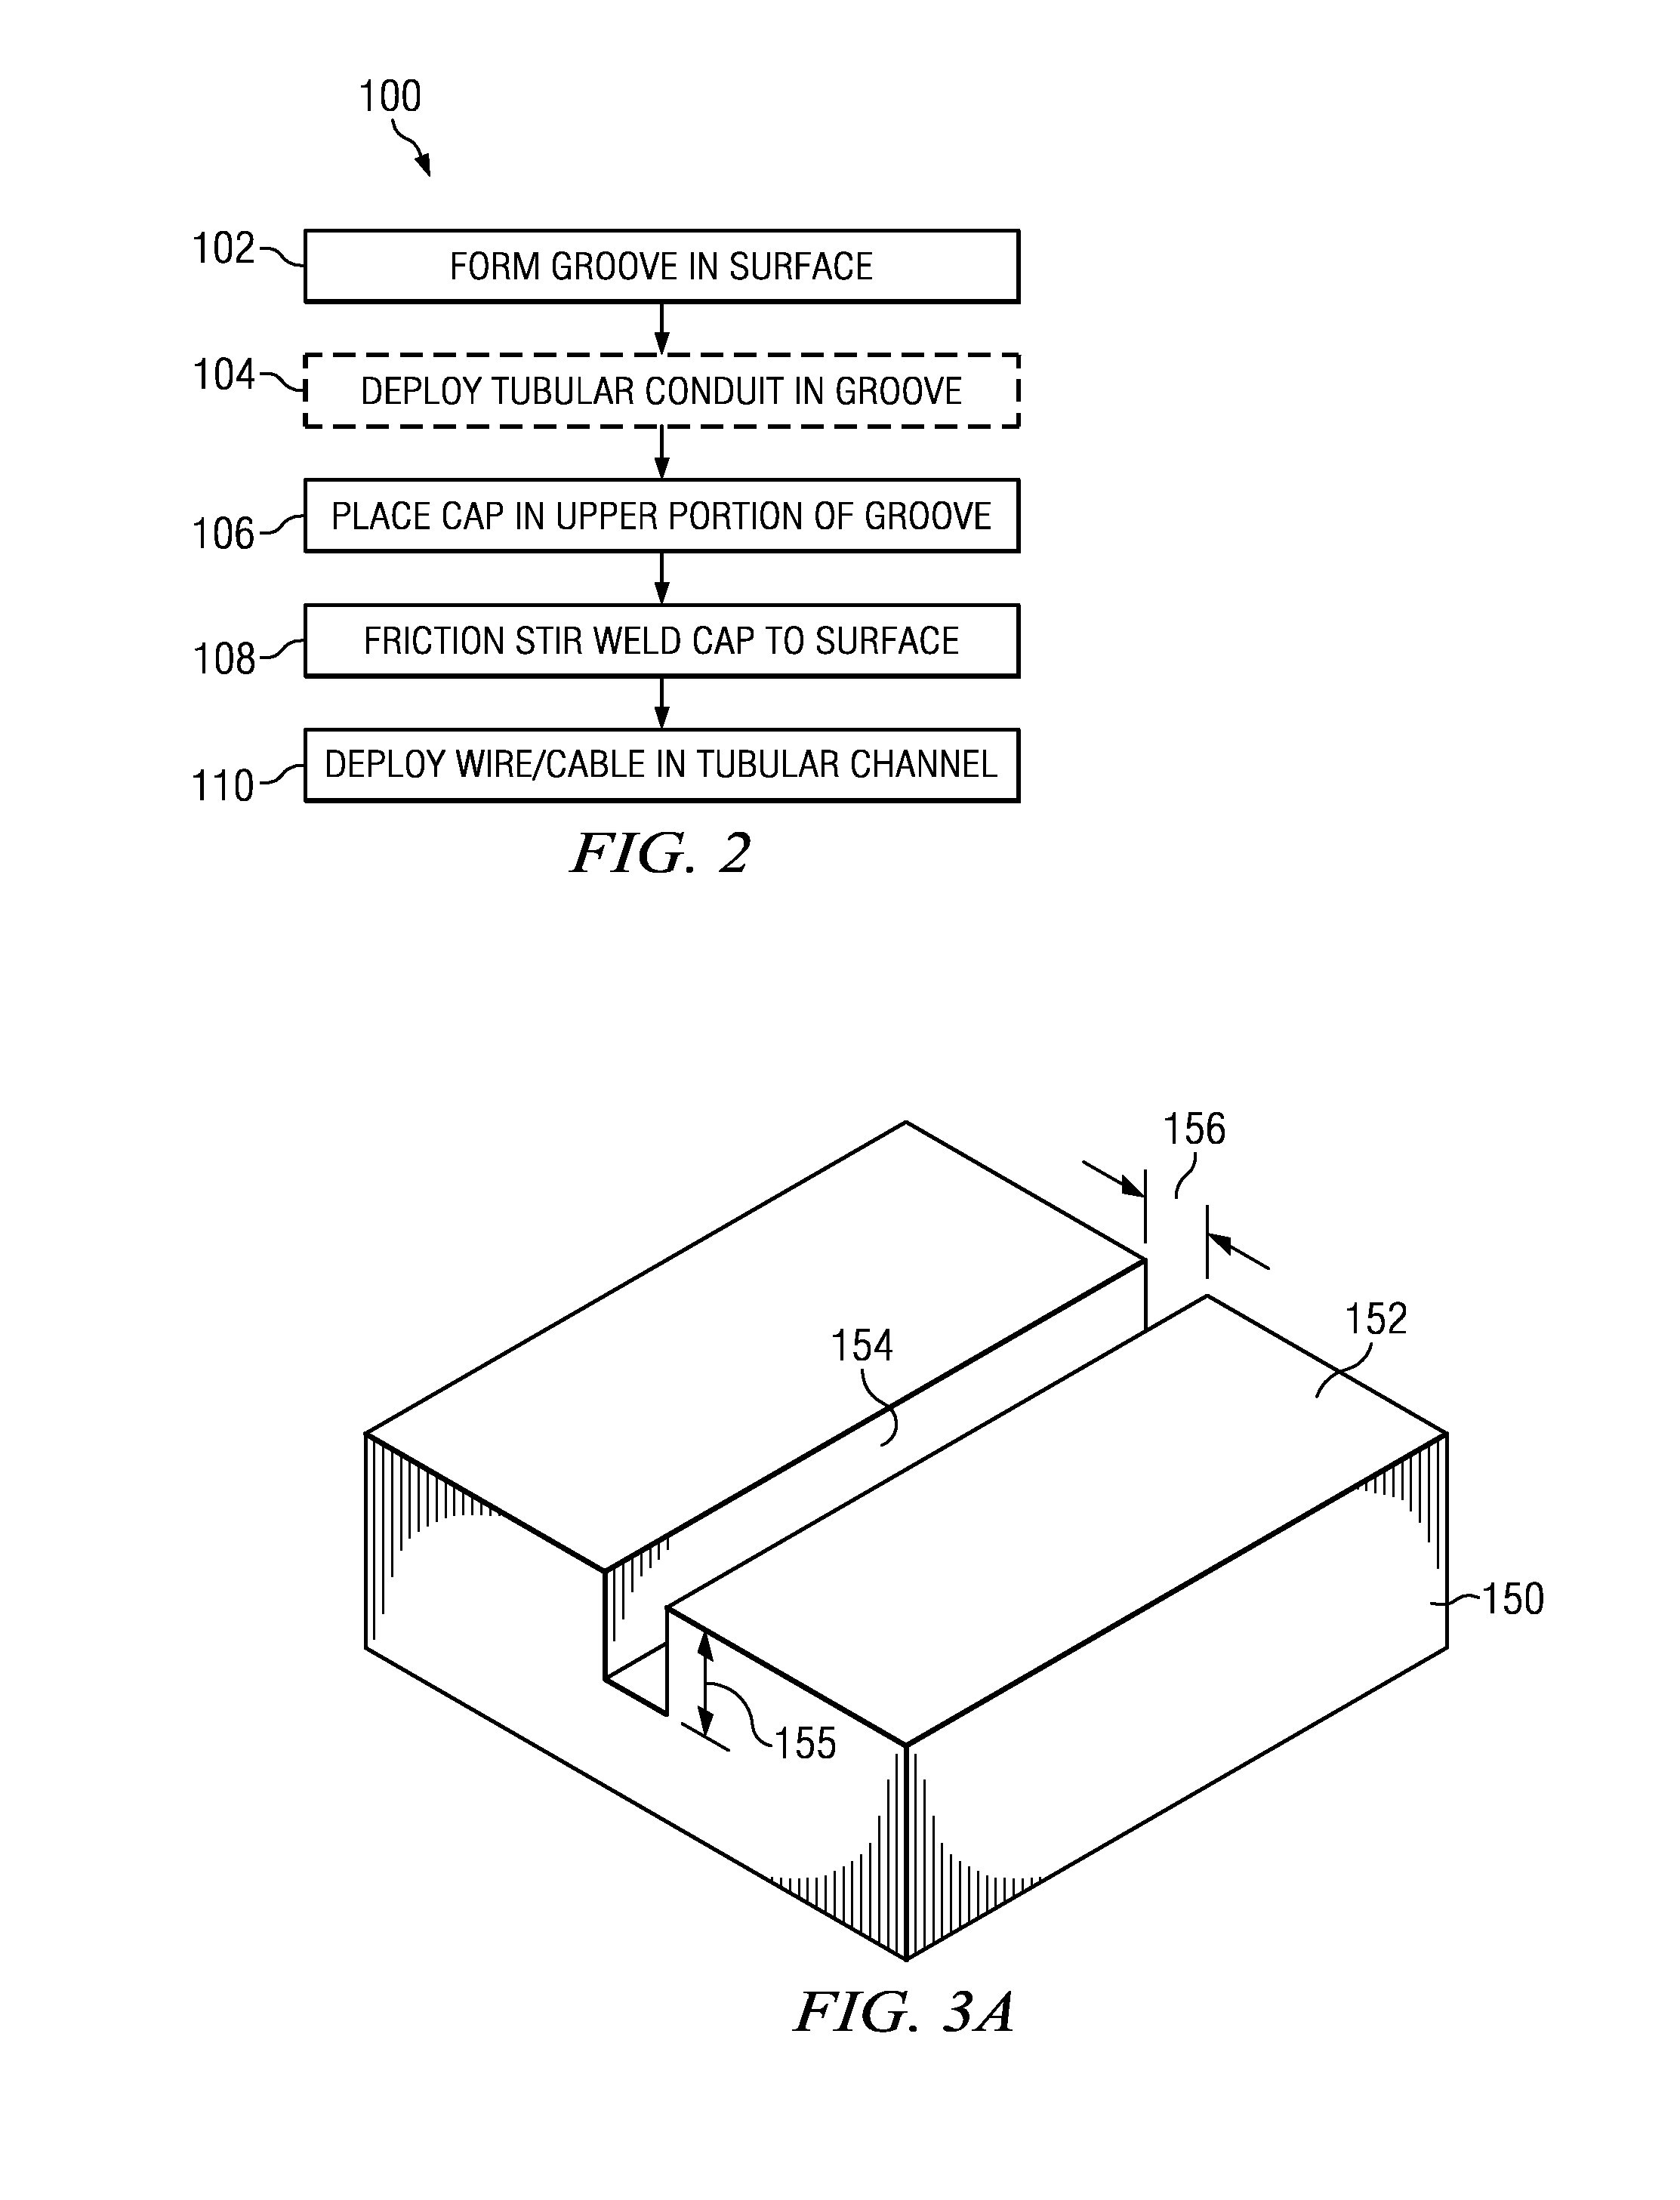 Article of manufacture having a sub-surface friction stir welded channel